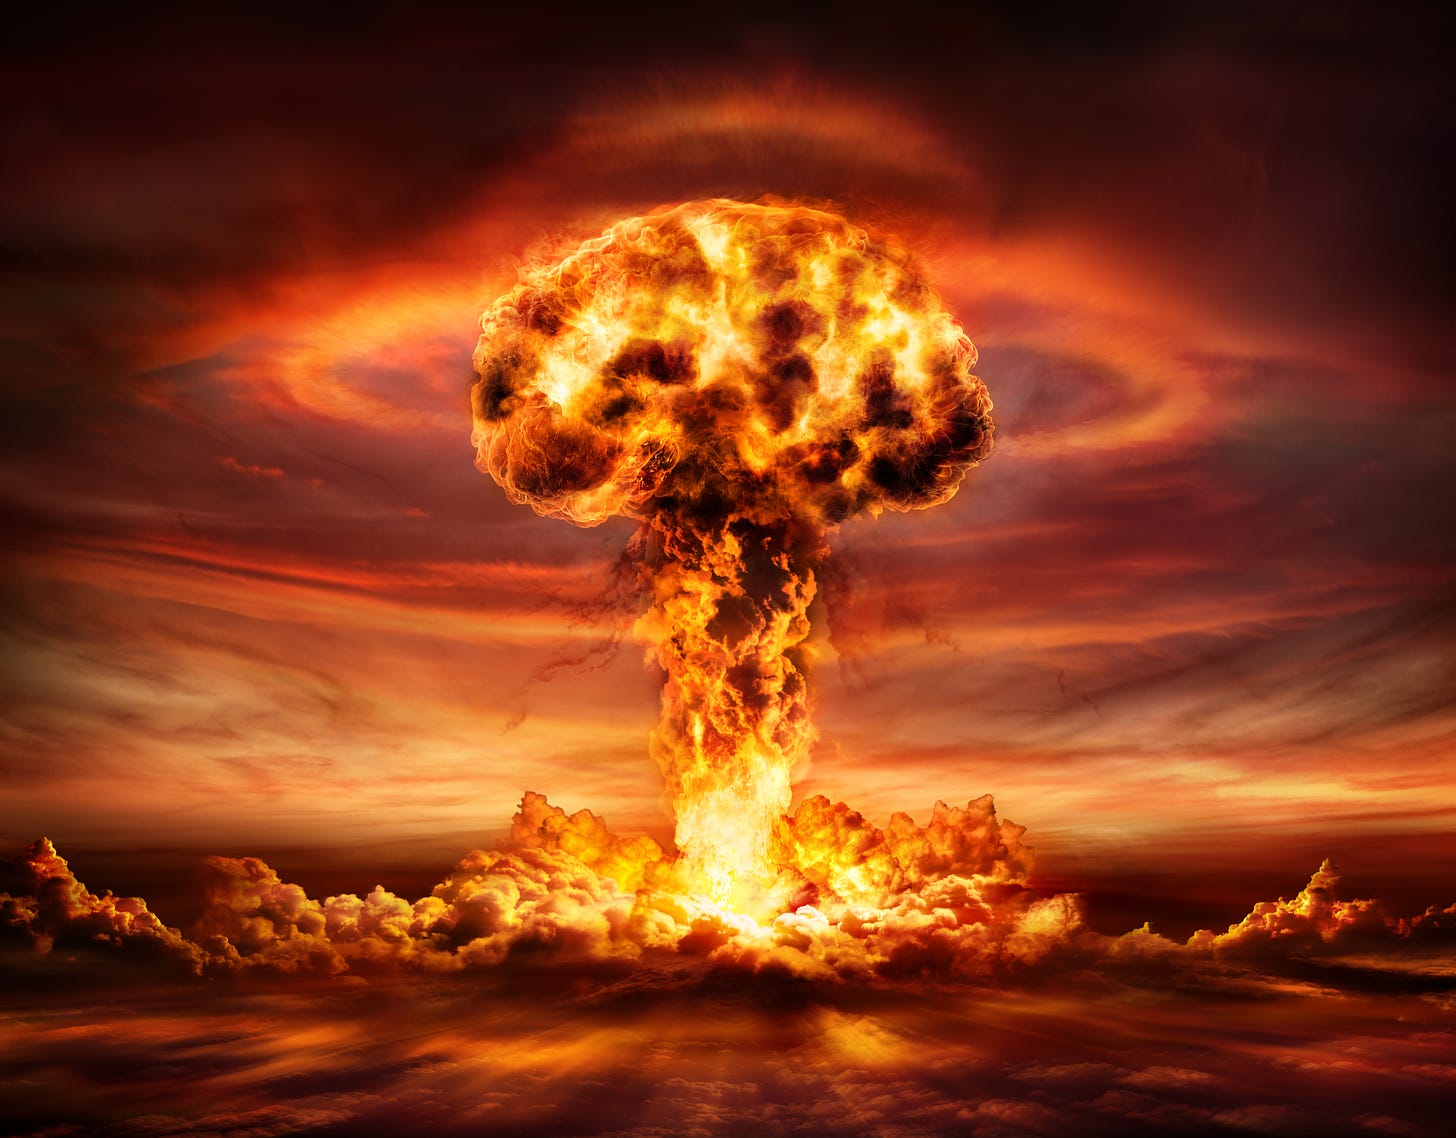 The war games scenario lays out a case where both countries could resort to nuclear weapons (Pictured: A file image of a nuclear explosion)